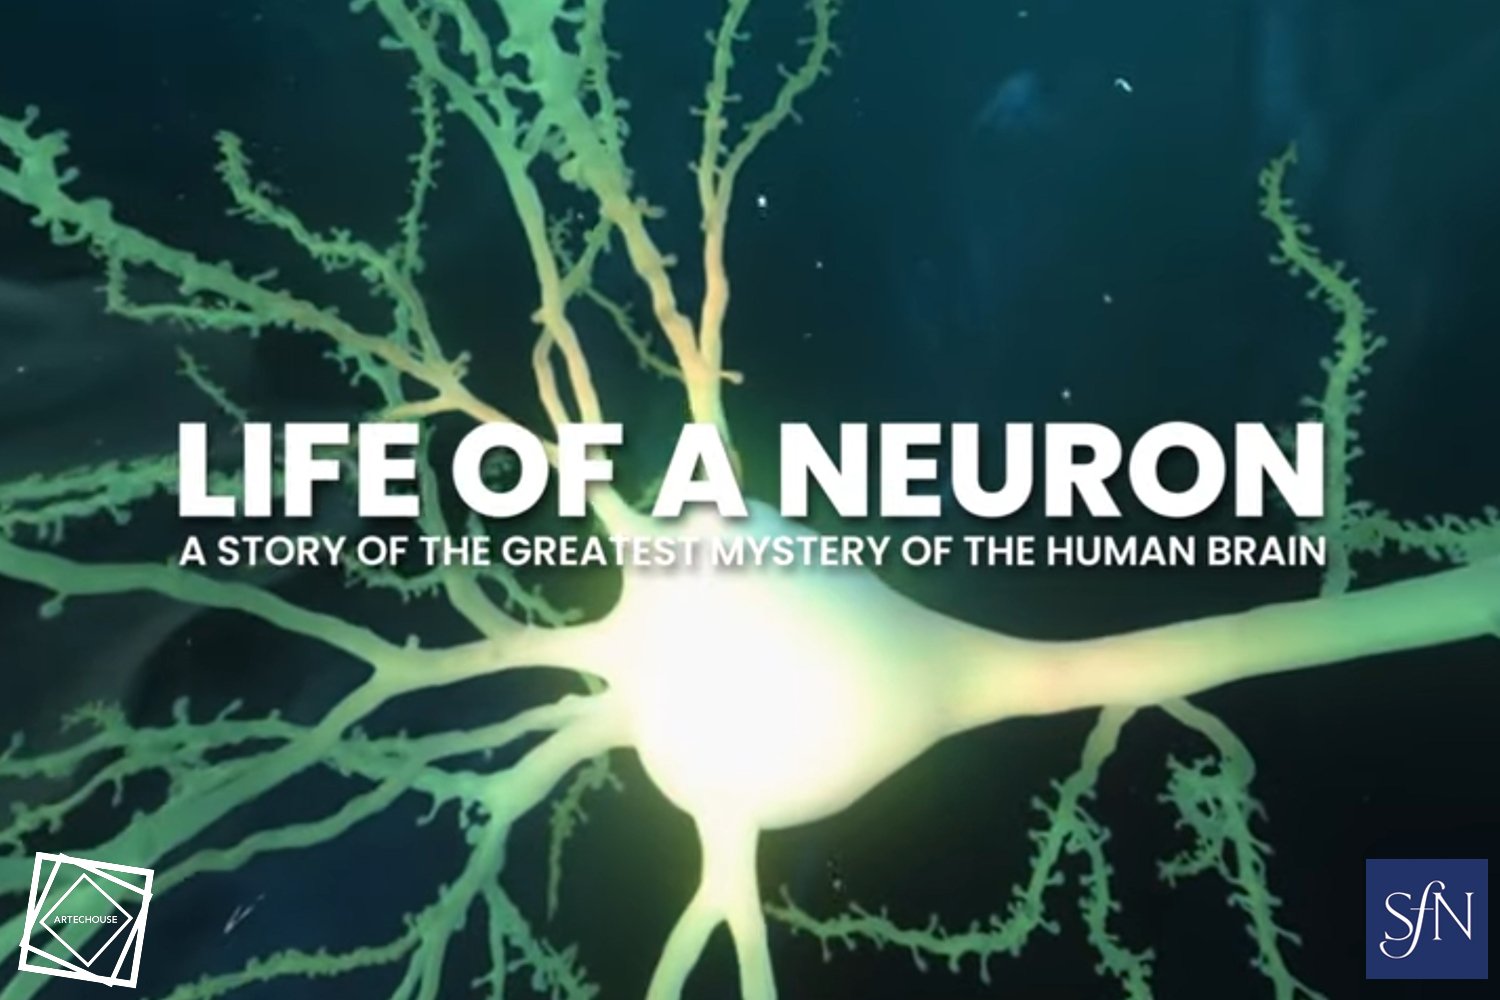 Life of a Neuron exhibition, promotional image